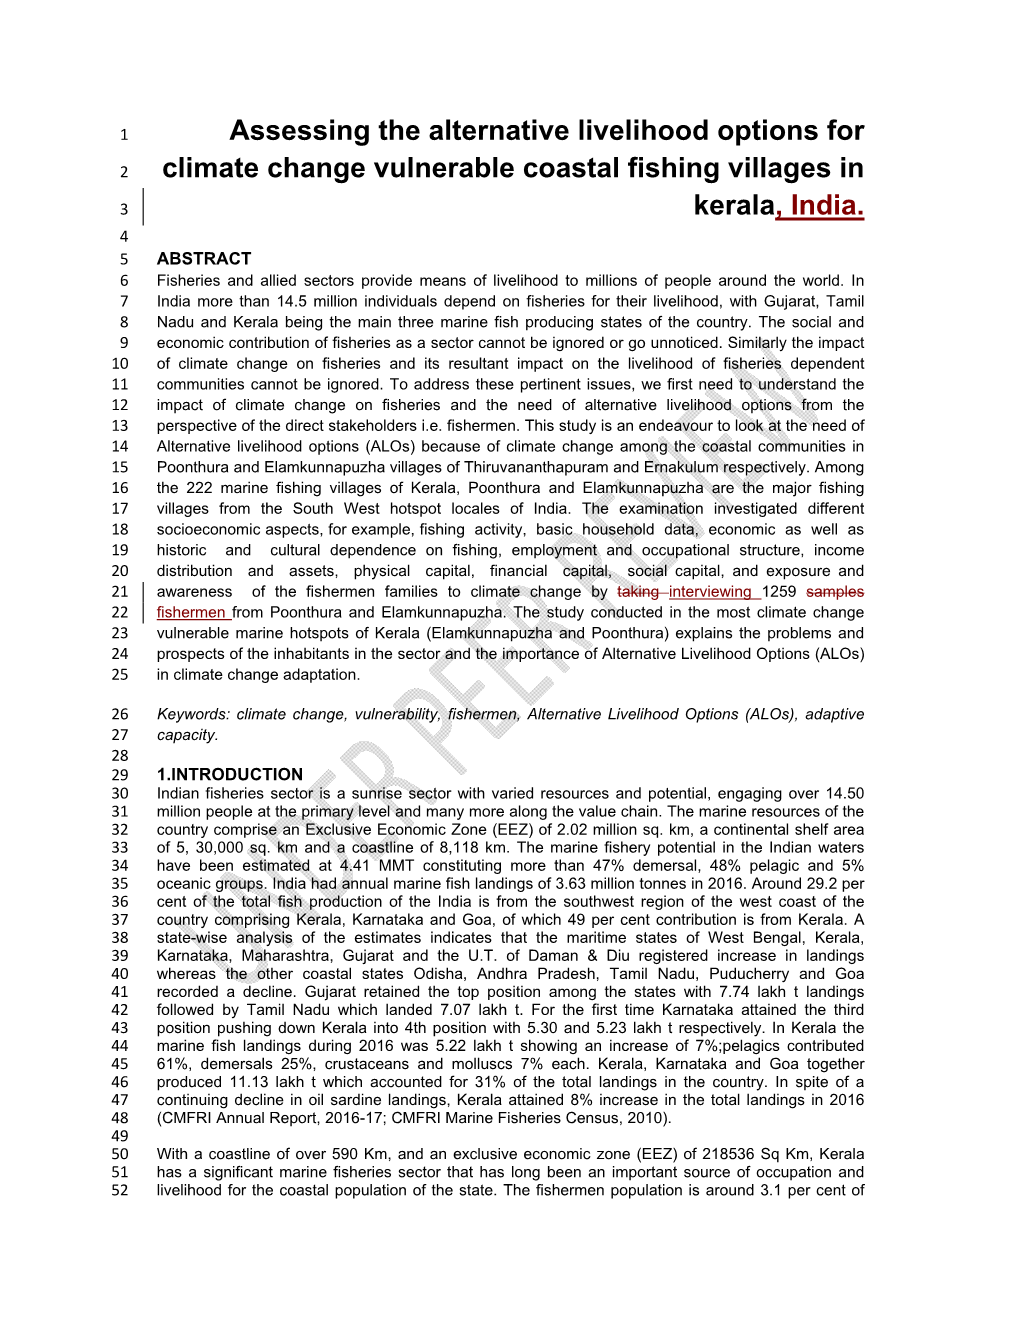 Assessing the Alternative Livelihood Options for Climate Change